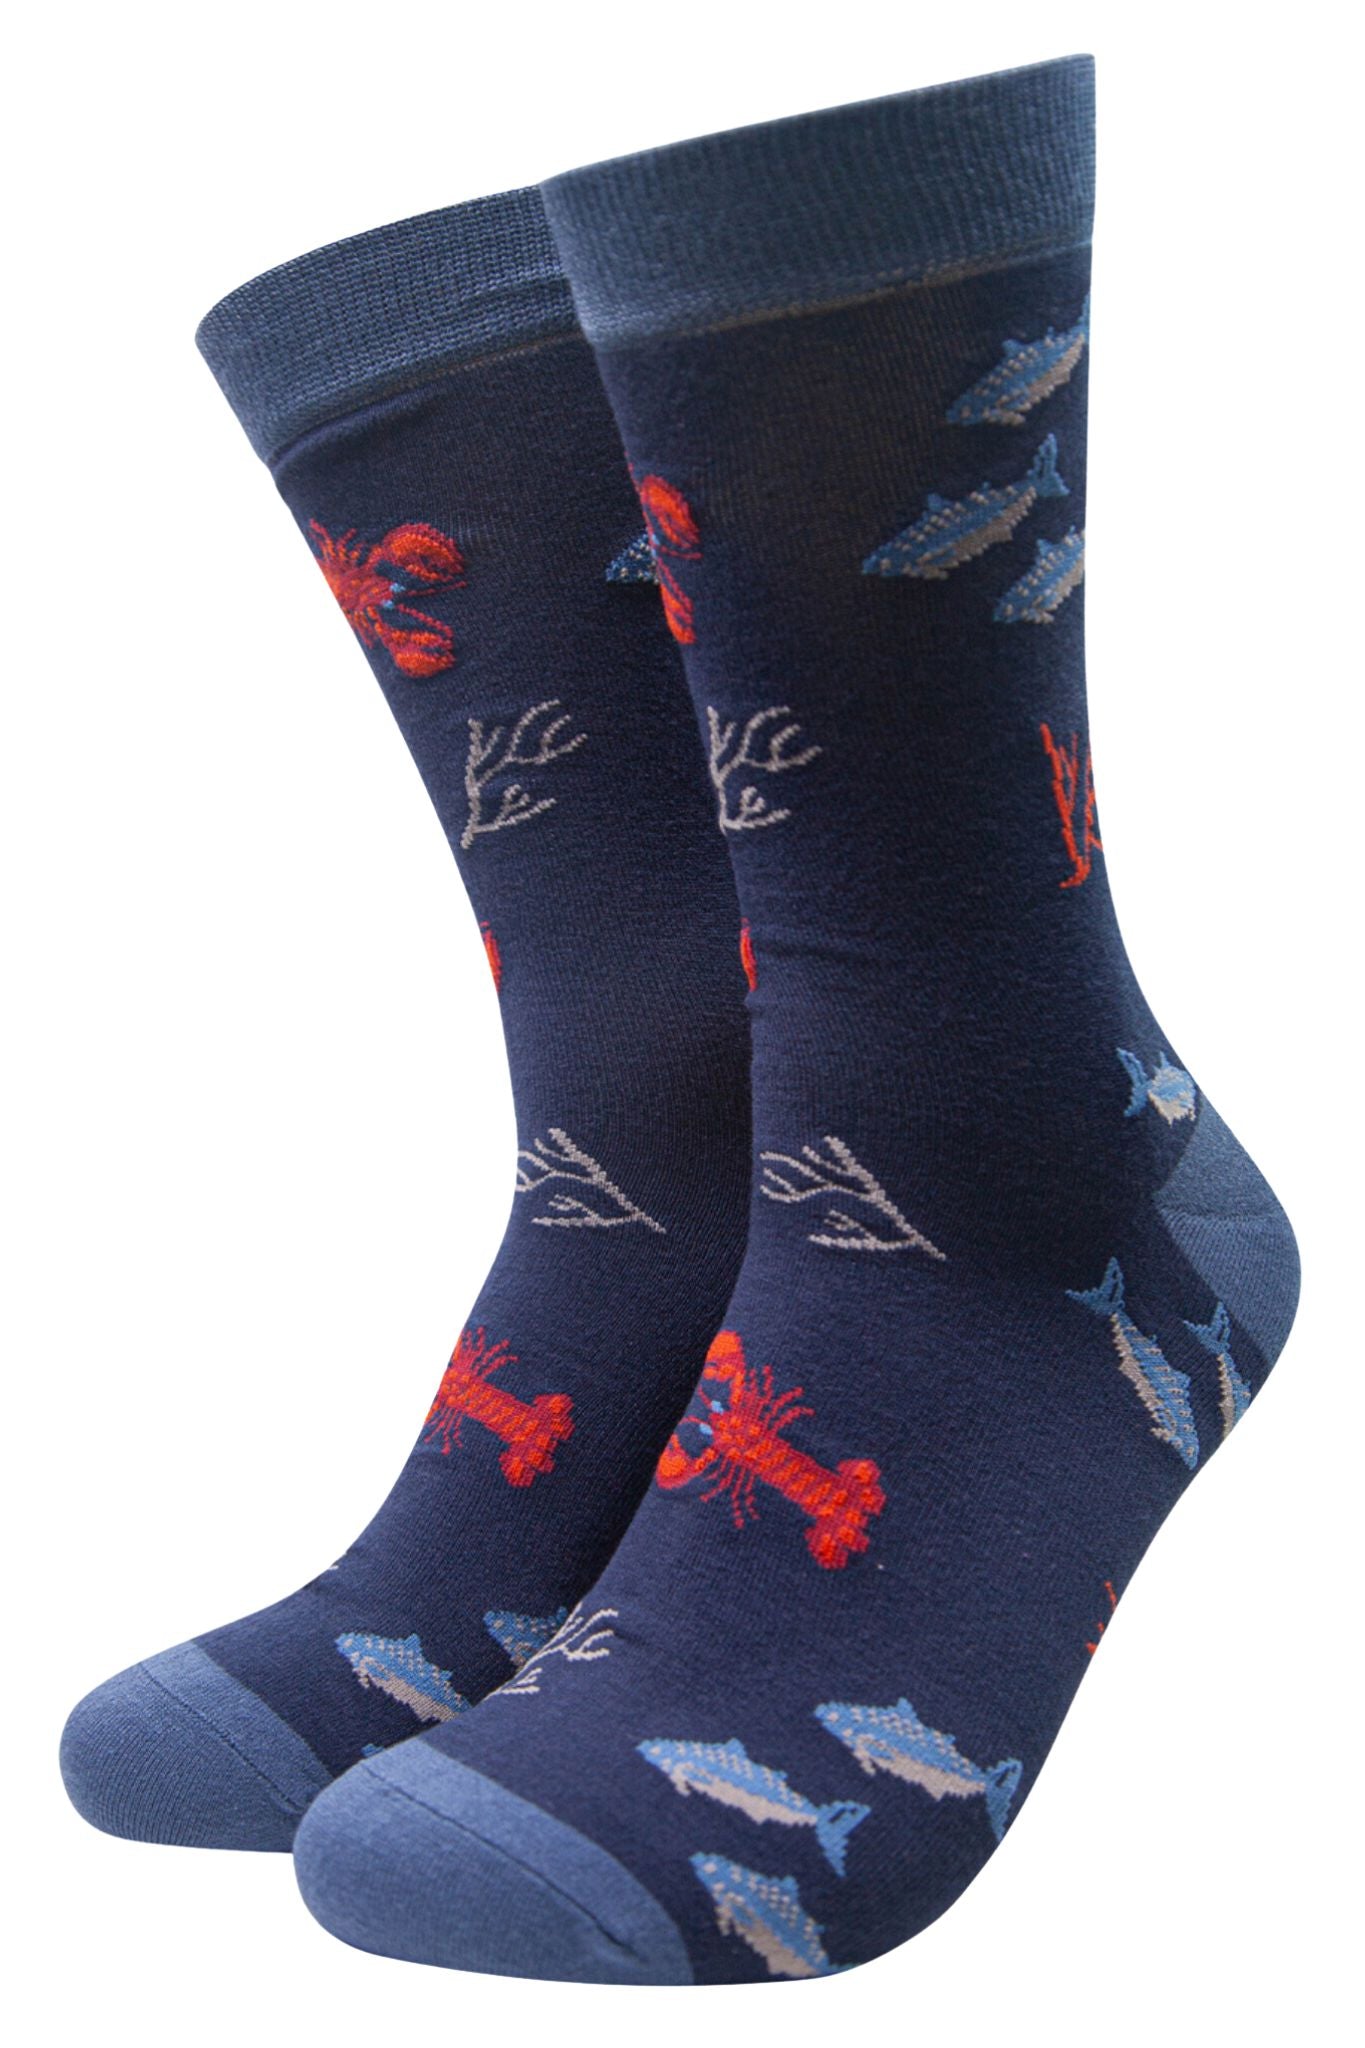 blue bamboo dress socks with a pattern of lobsters and fish